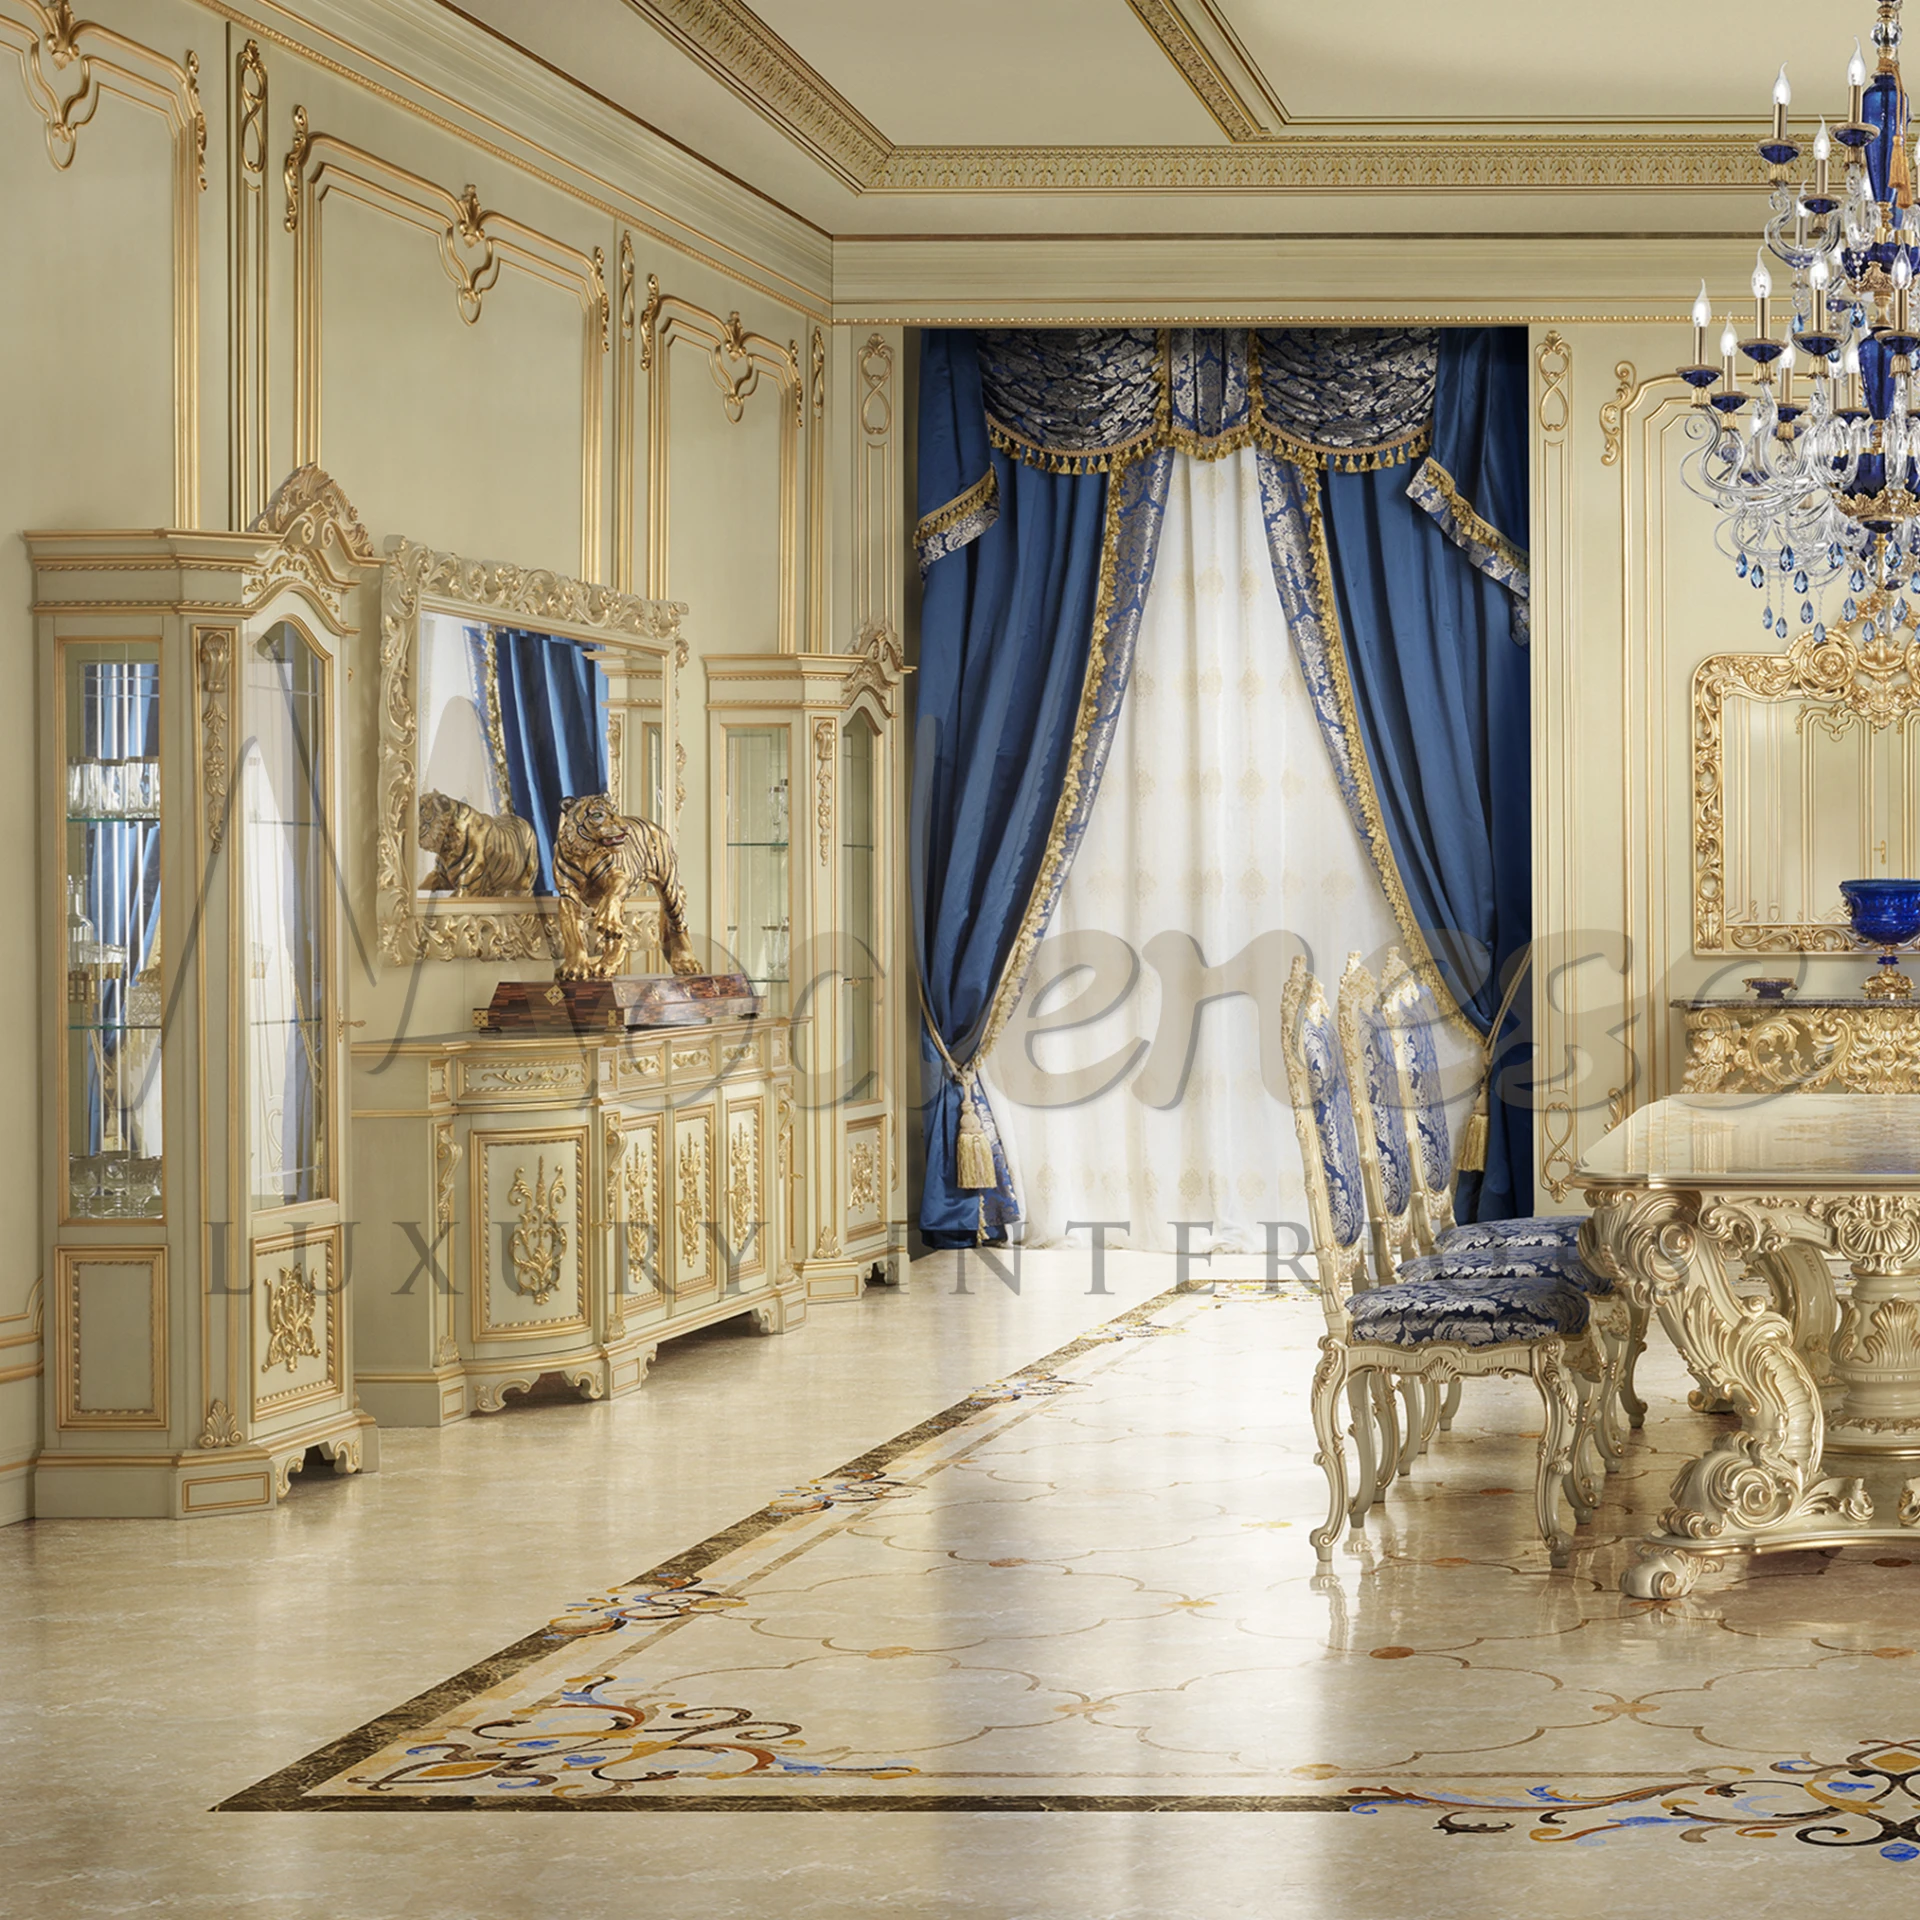 Luxury living room with stylish gold furniture, a striking mirror, and window with luxurious blue curtains